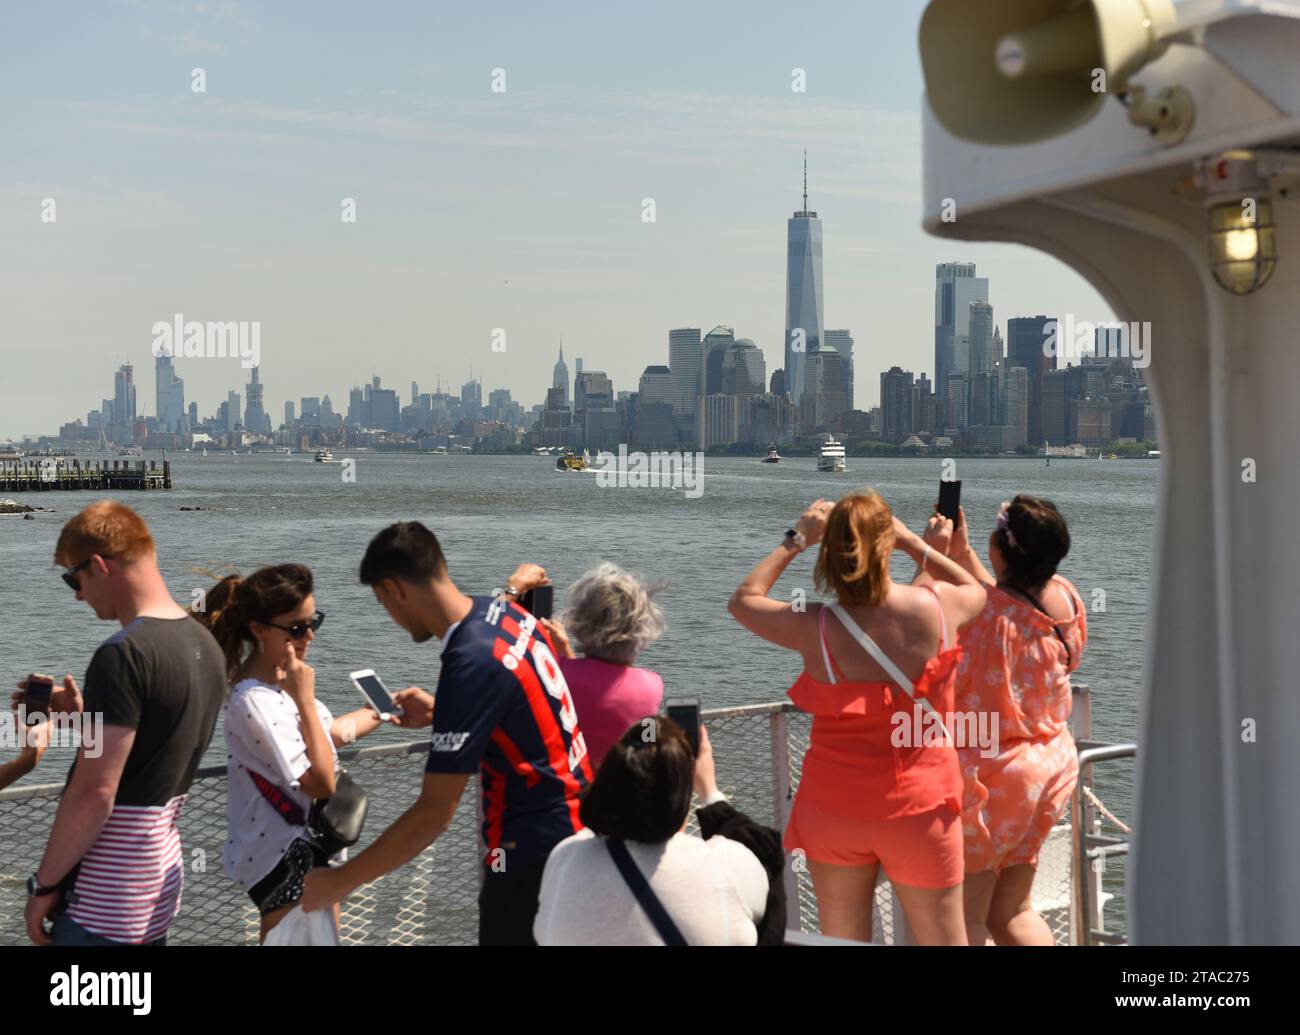 New York, USA - June 09, 2018: Passengers of the Statue of Liberty Ferry and  buildings of financial district in lower Manhattan at the background. Stock Photo